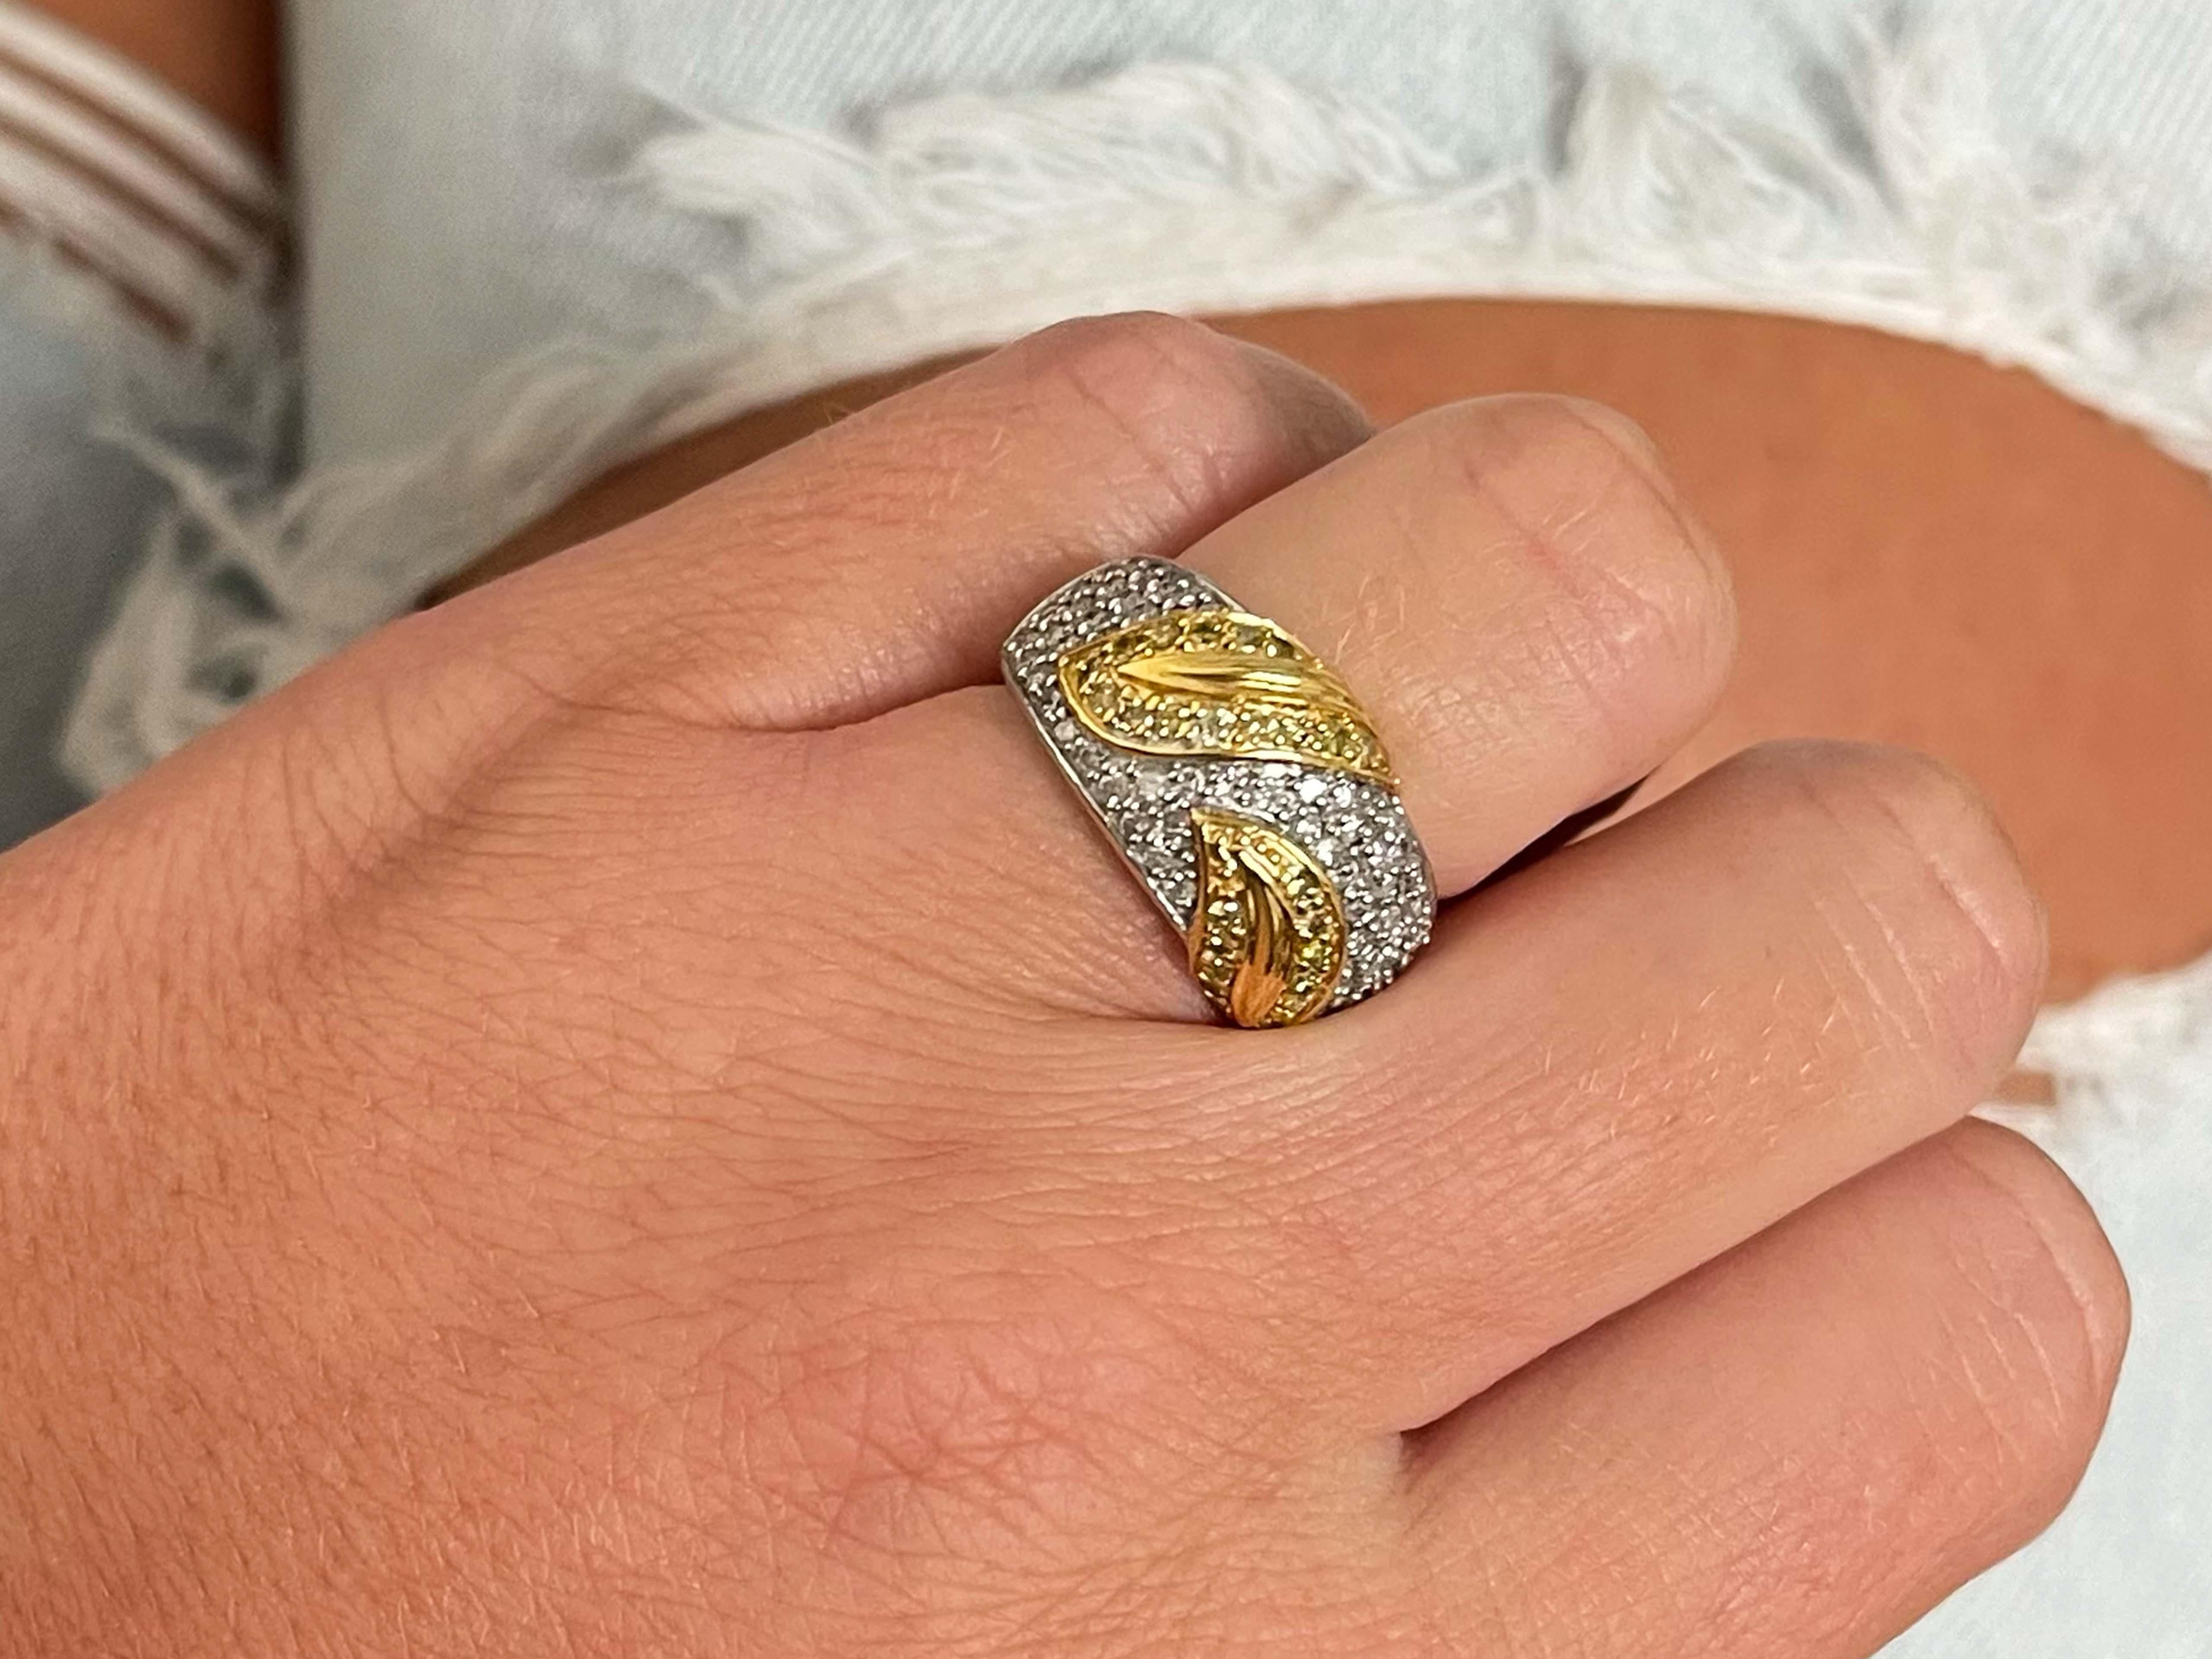 Item Specifications:

Metal: 14K White Gold

Style: Statement Ring

Ring Size: 6 (resizing available for a fee)

Total Weight: 7.80 Grams
​
​Ring Width: 11.4 mm

White Diamond Carat Weight: ~0.75 carats

Yellow Diamond Carat Weight: ~0.25